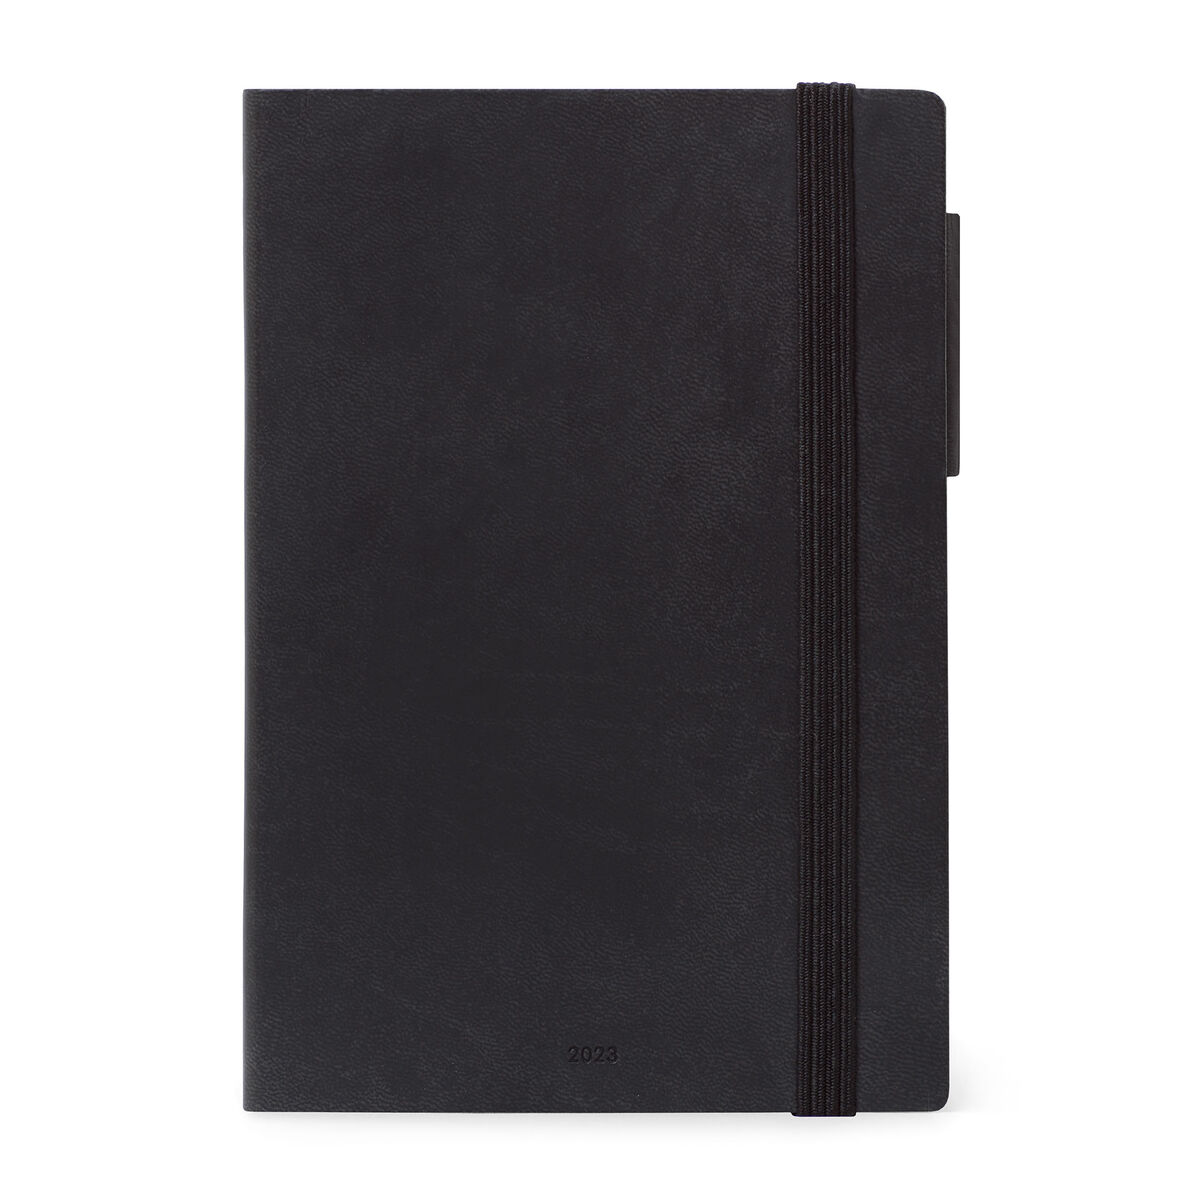 12-Month Daily Diary - Large - 2023, , zoo